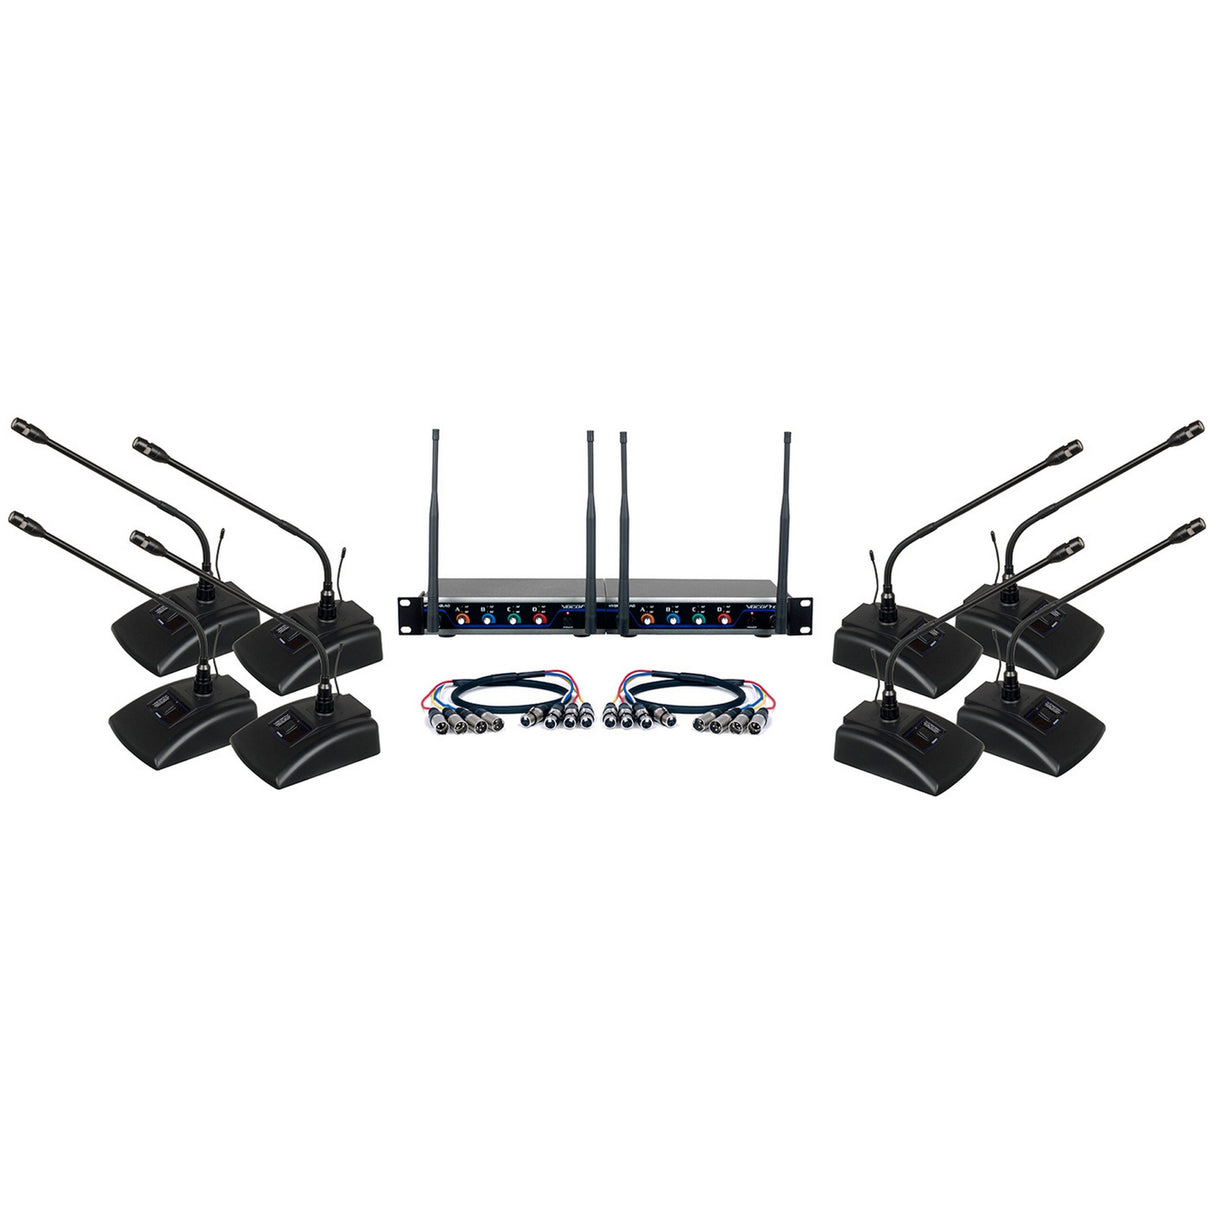 VocoPro DIGITAL-CONF-8 8-Channel UHF Wireless Conference Microphone System